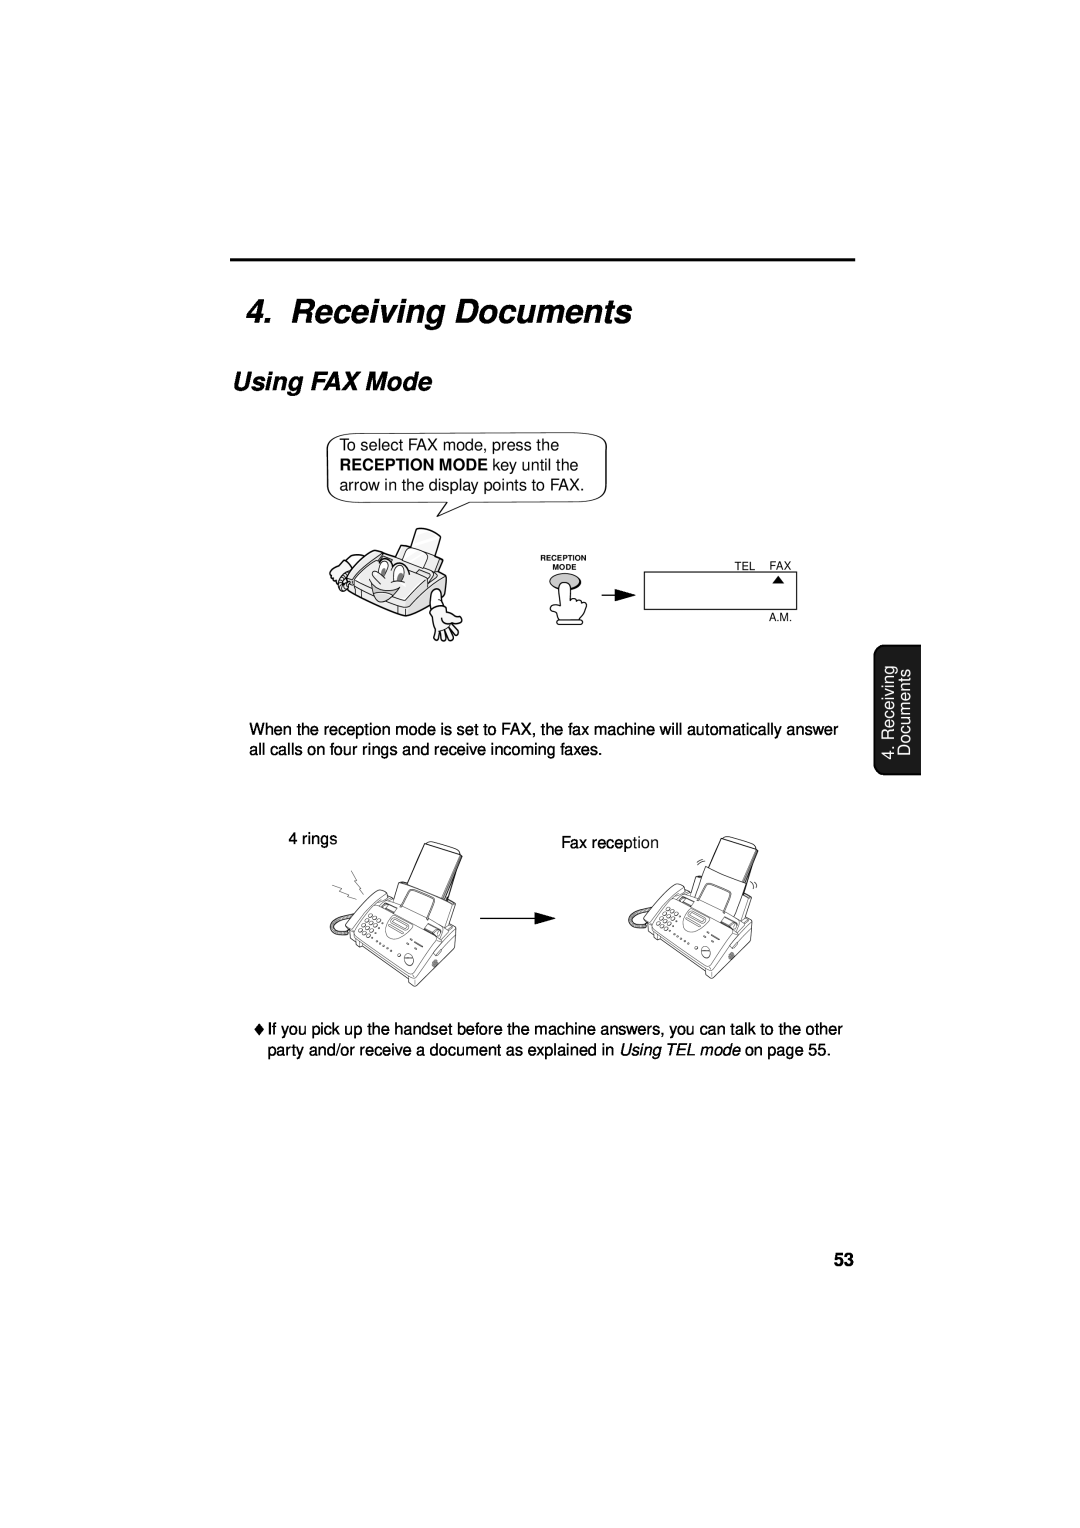 Sharp UX-340LM manual Receiving Documents, Using FAX Mode 